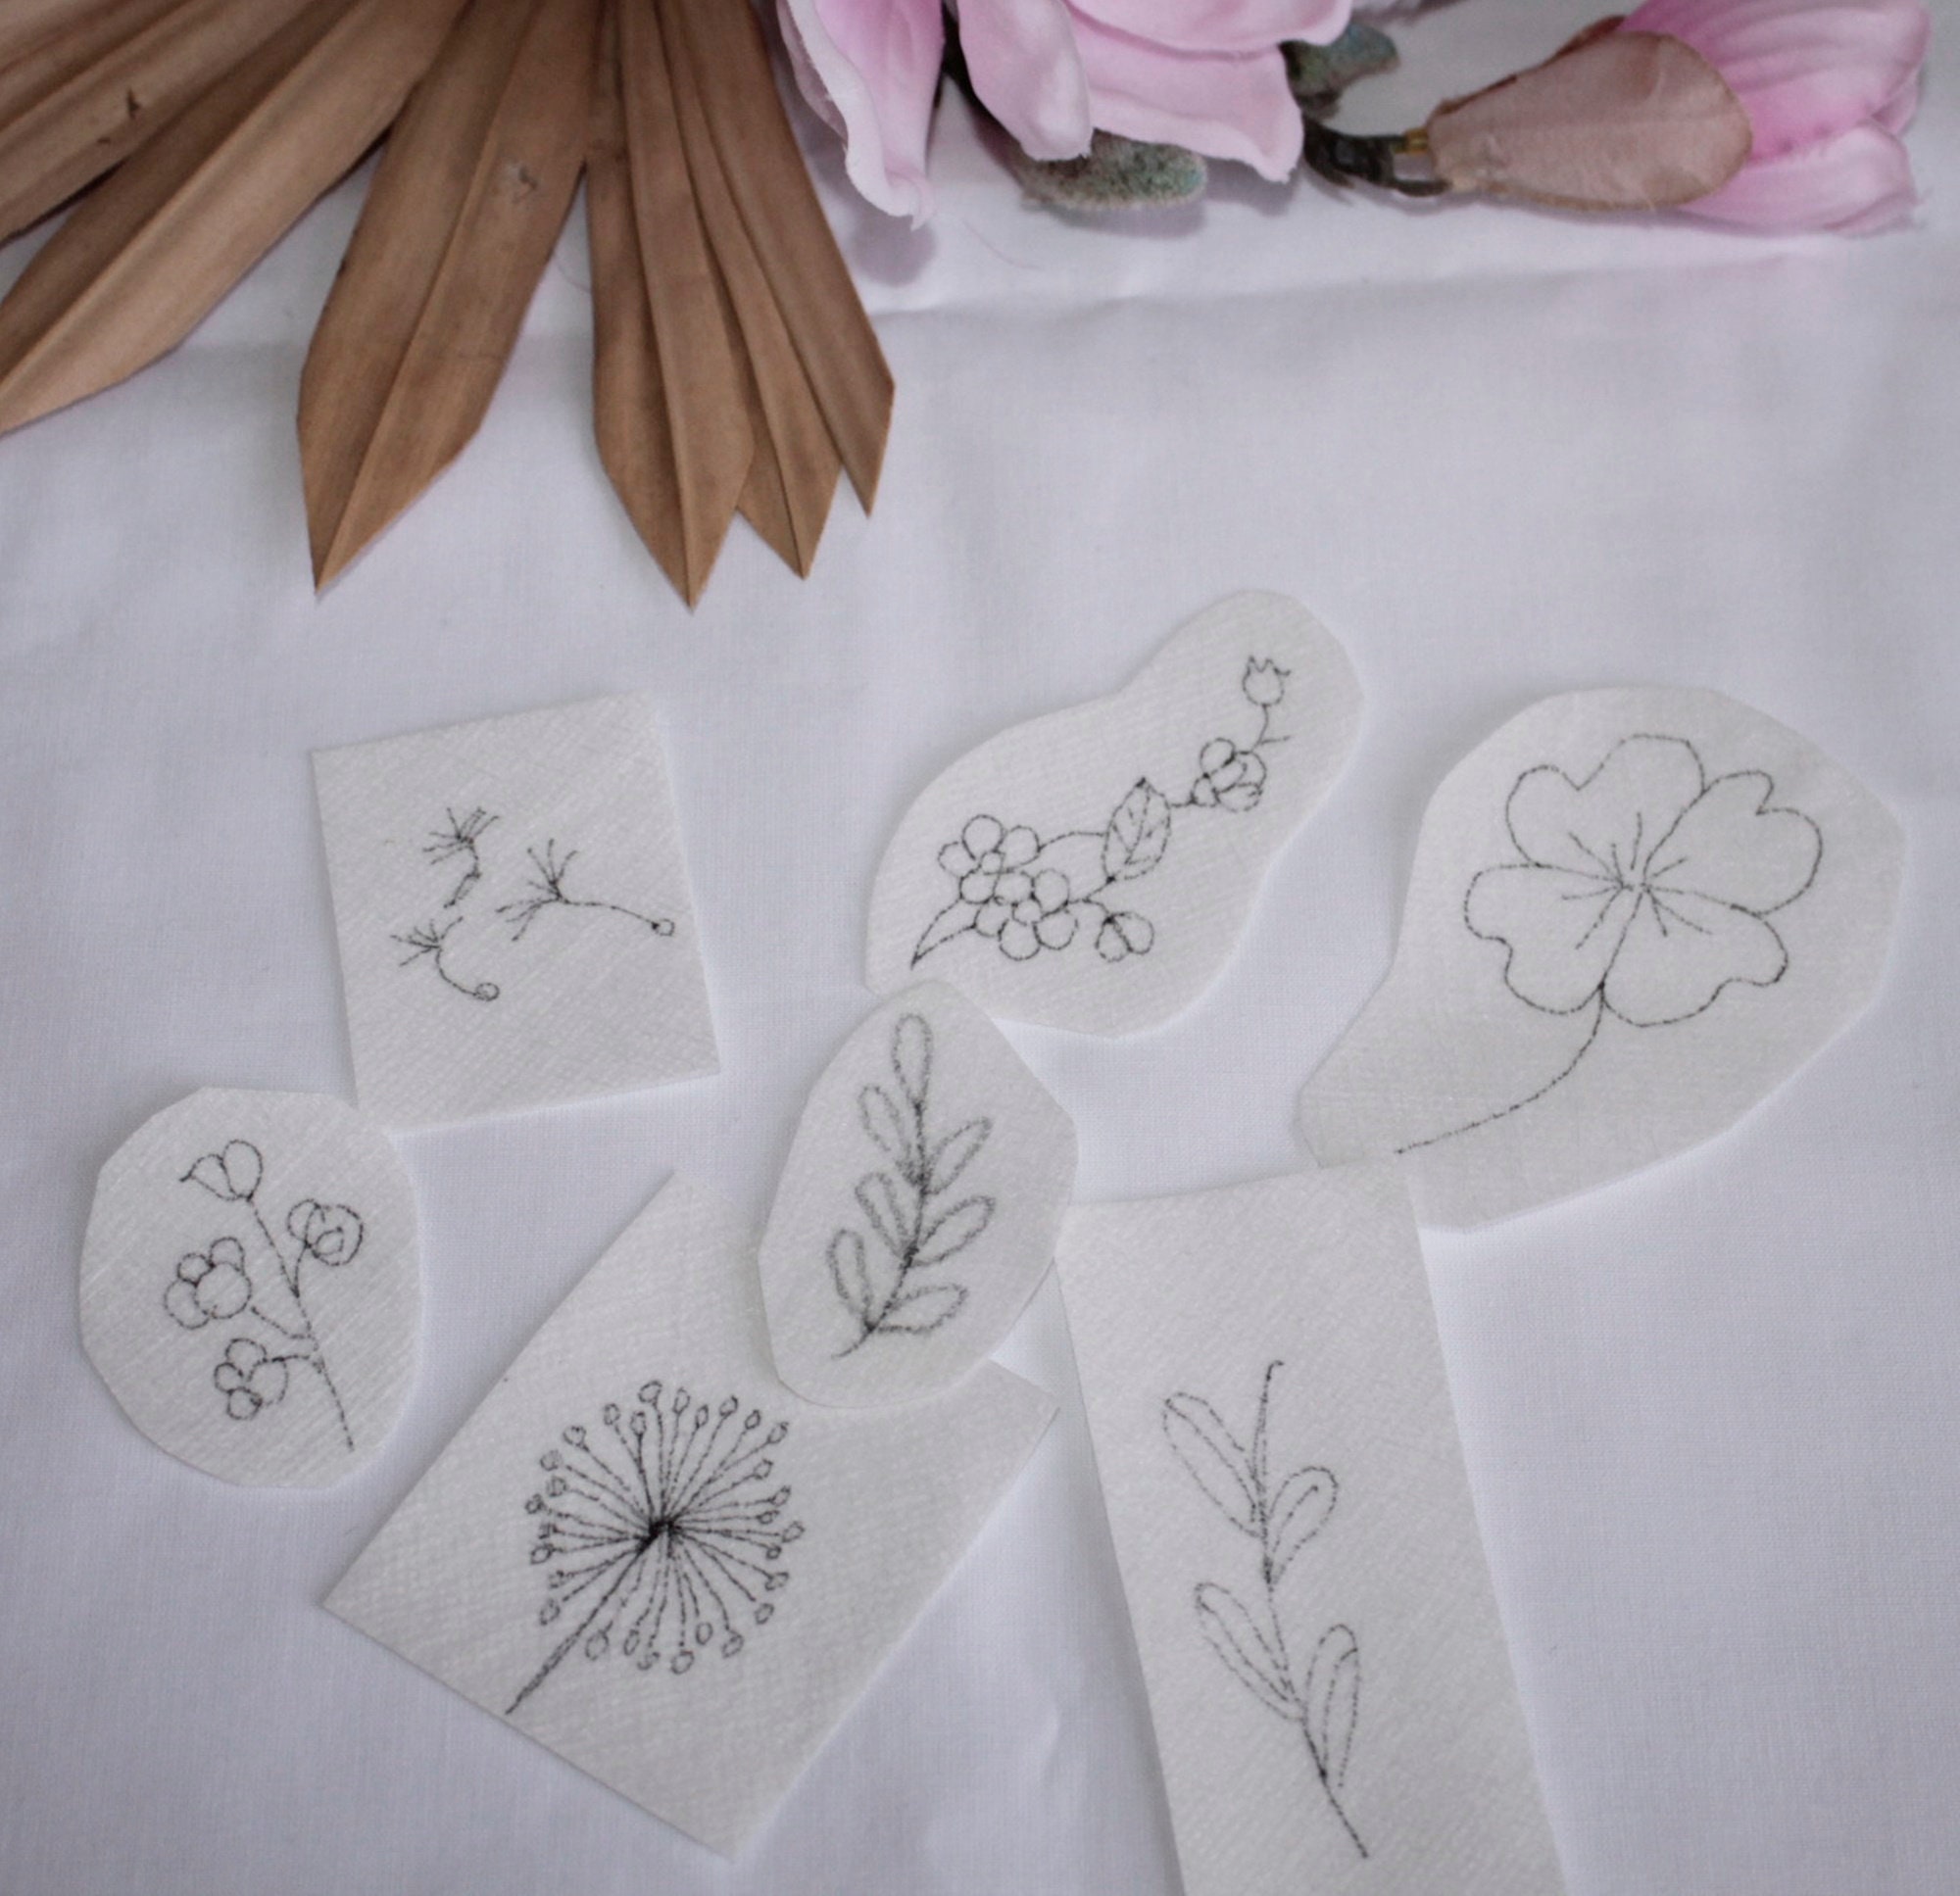 Mini Embroidery Templates Water Soluble 7 Small Templates 